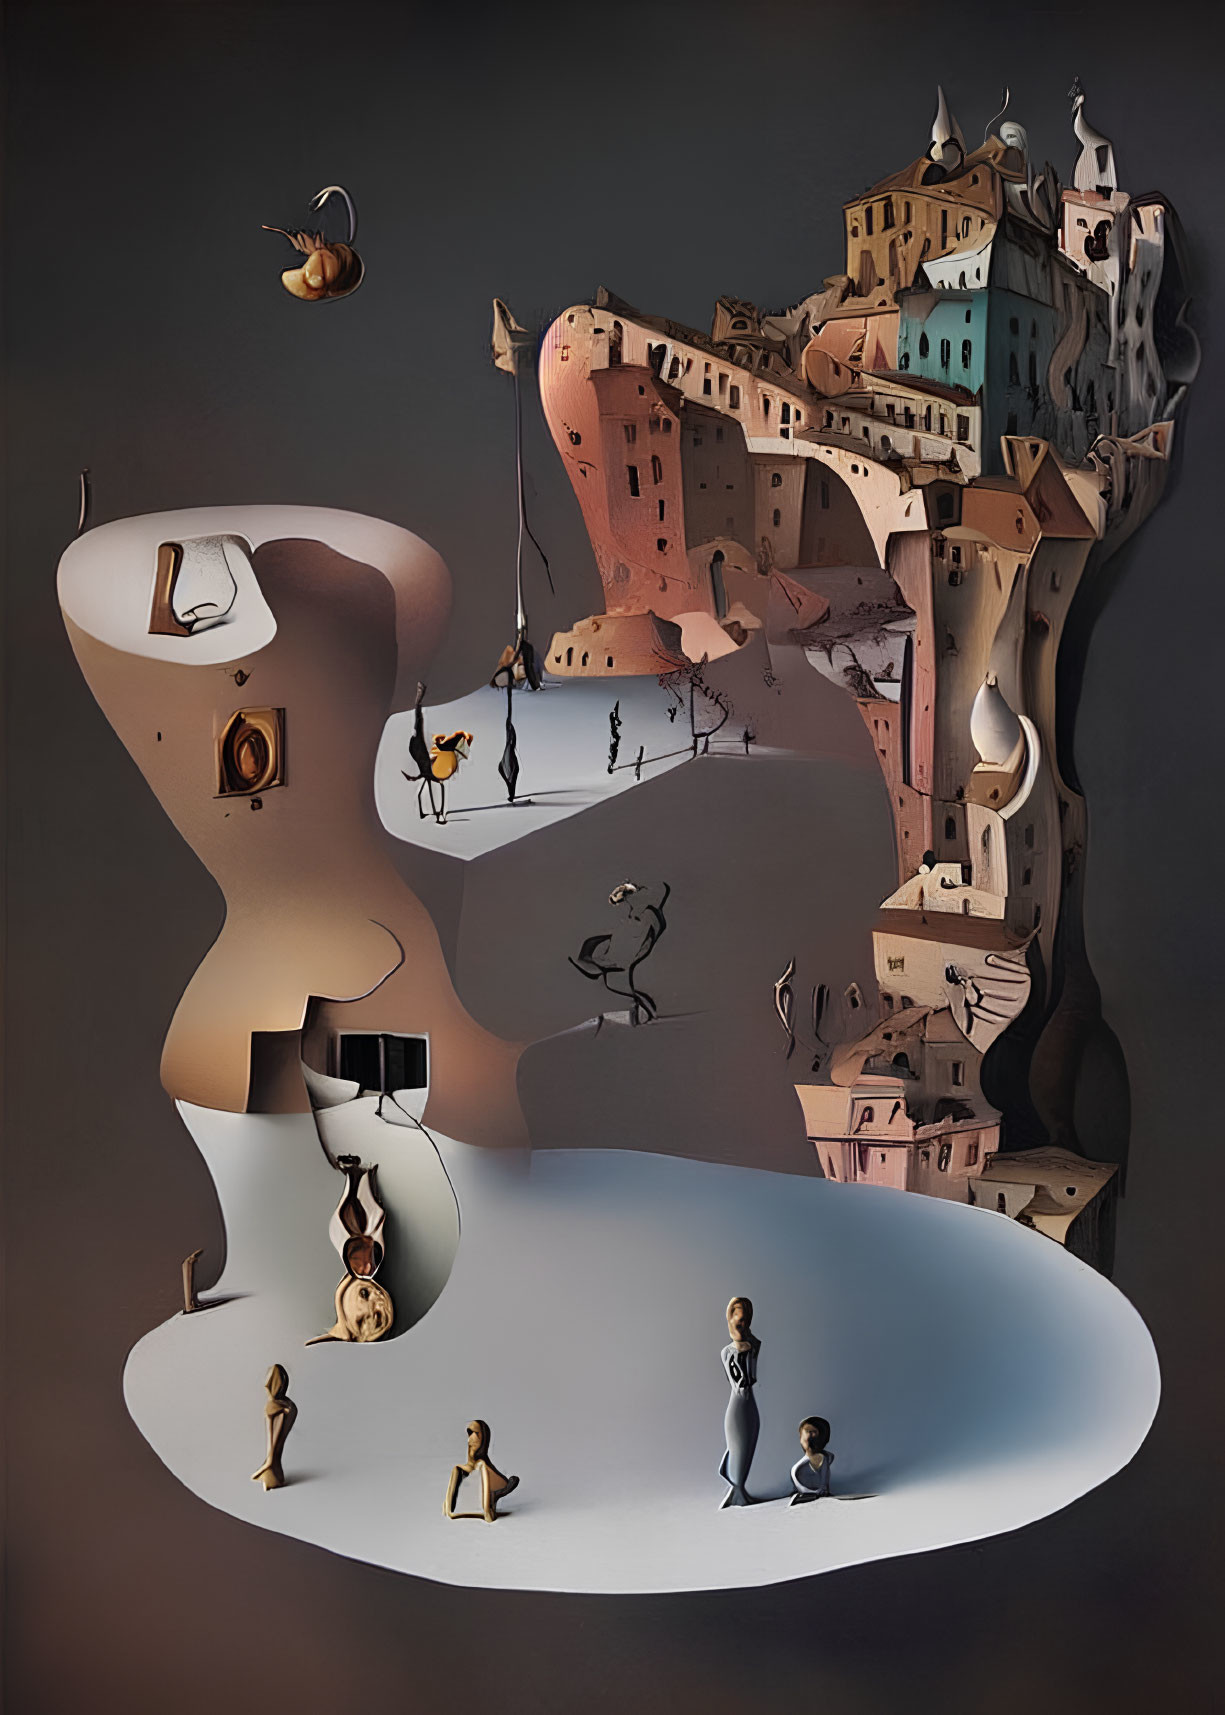 Surreal artwork with impossible structure and figures